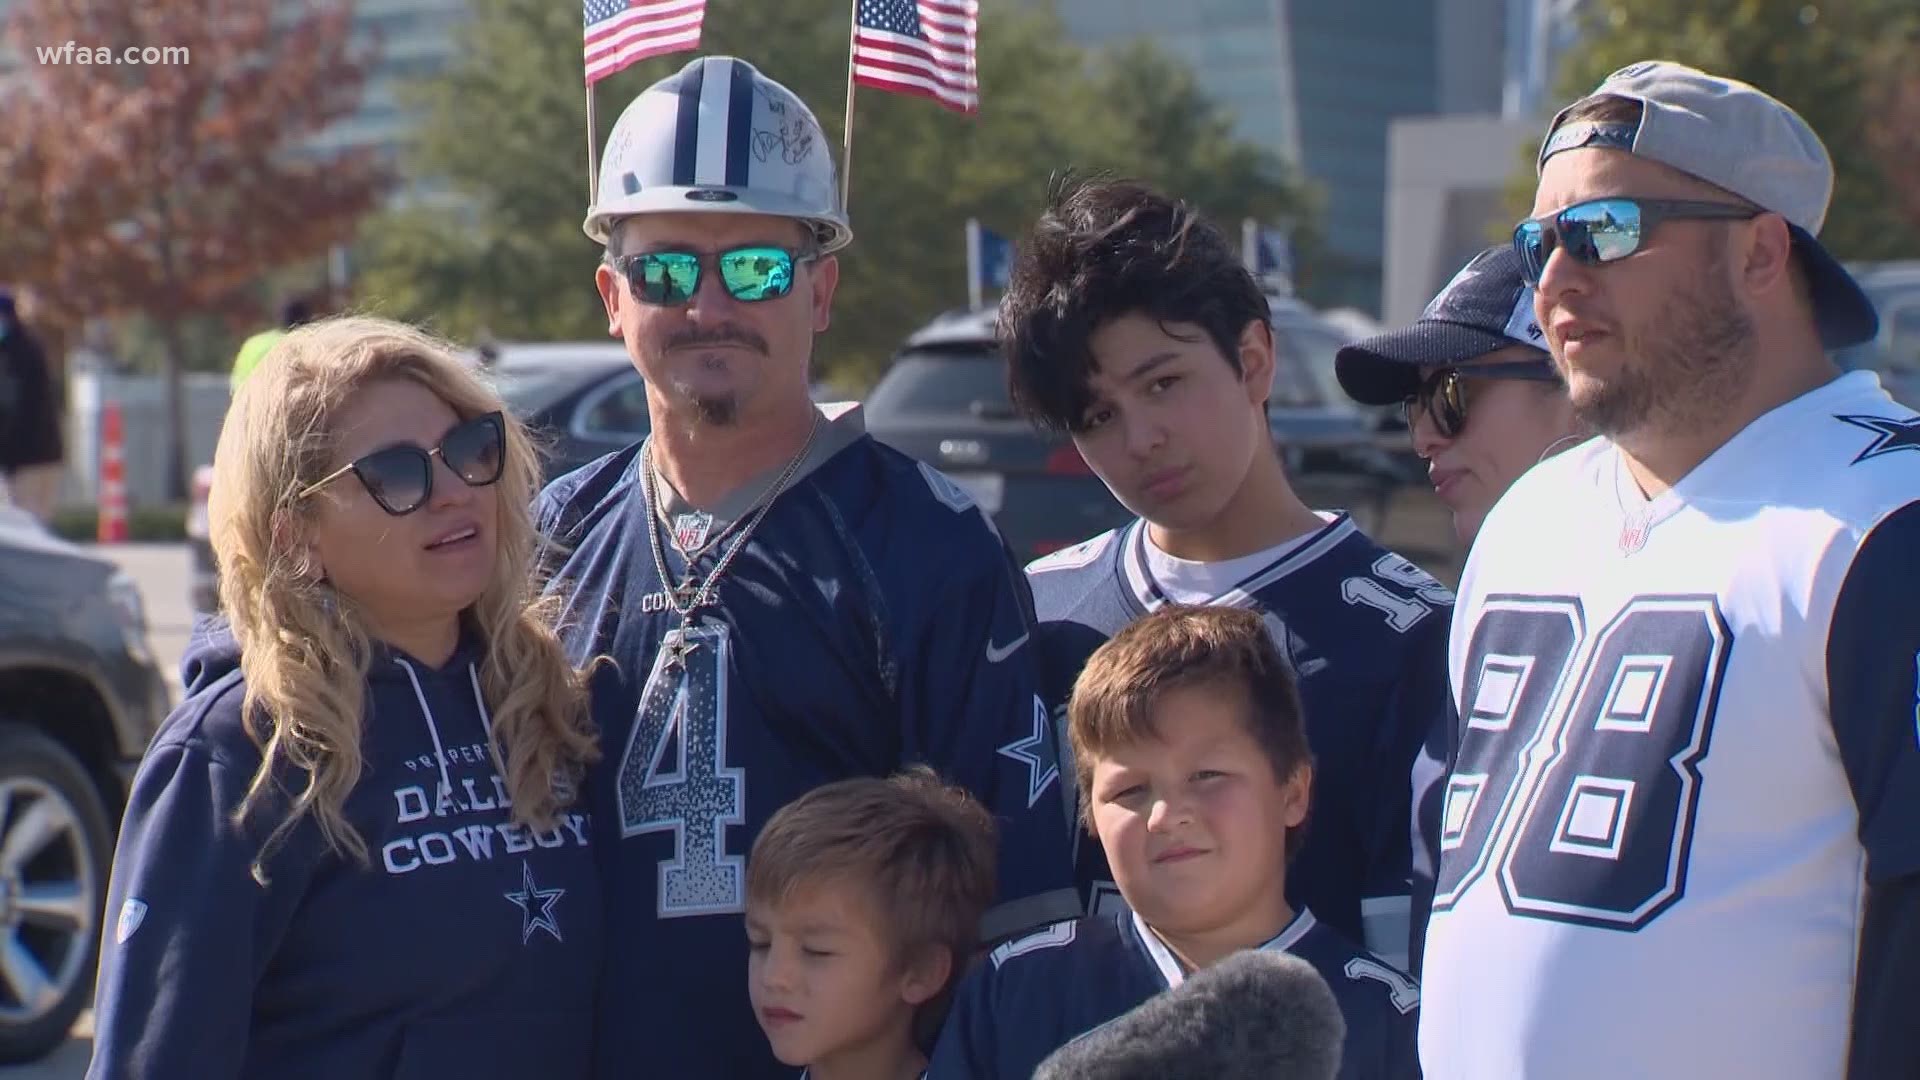 “Even with all the other mess going on in this world, I never gave it a second thought about being here,” Cowboys fan Cy Ditmore said.